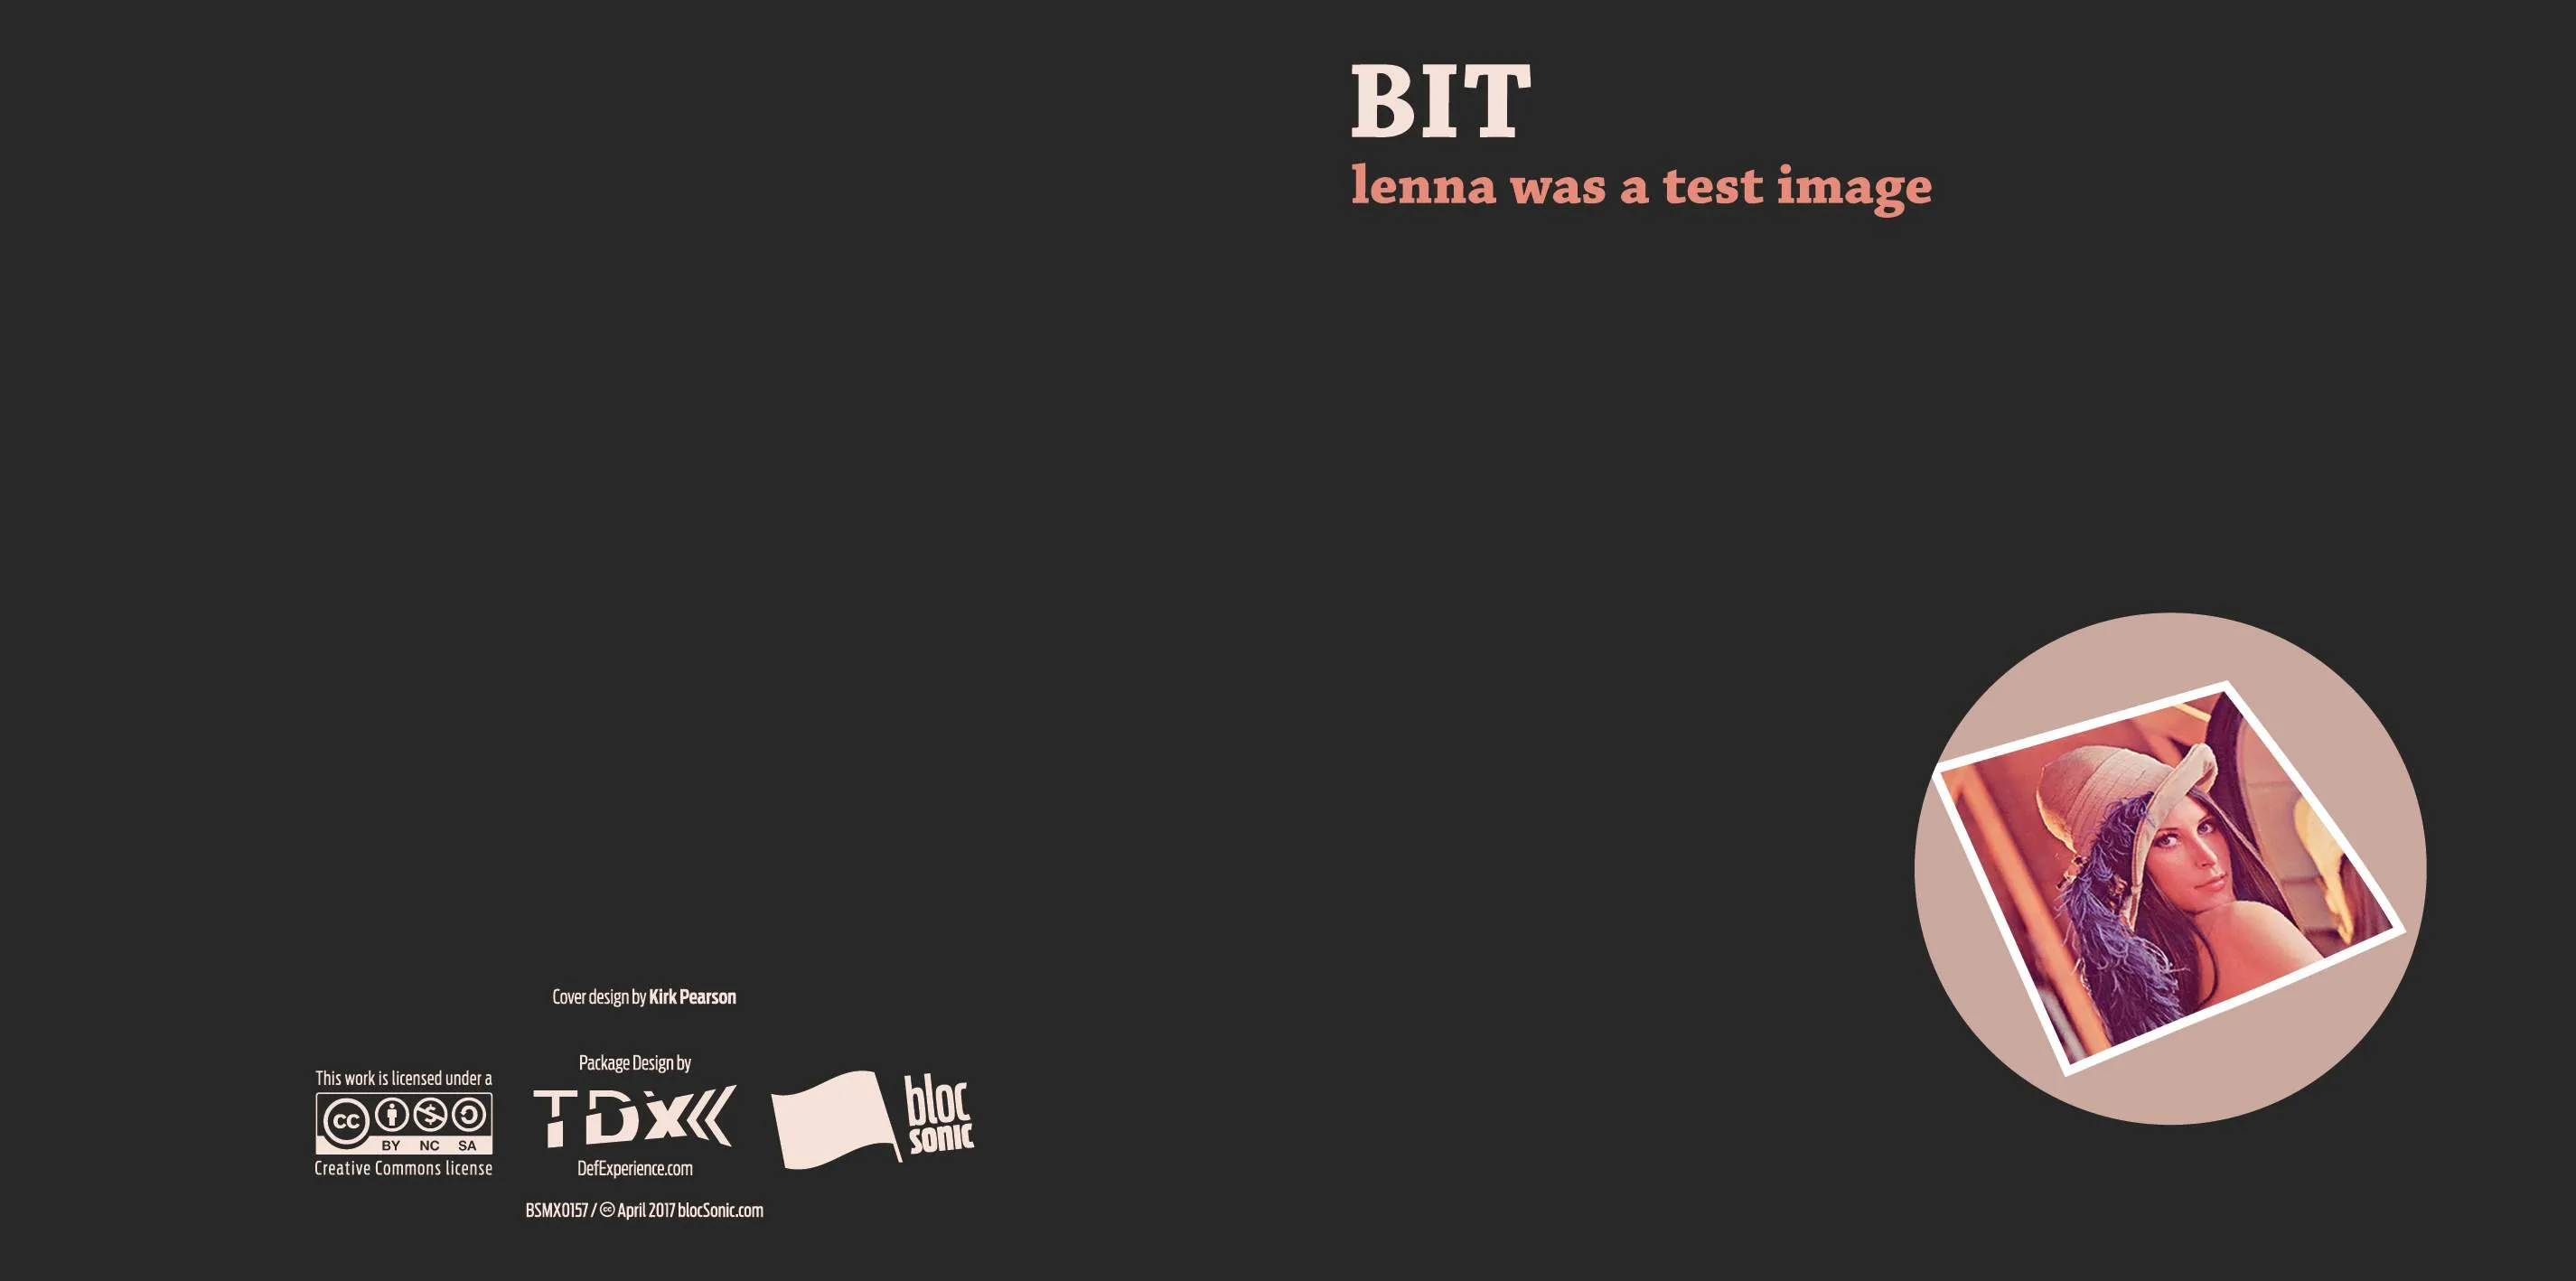 Album insert for “lenna was a test image” by BIT